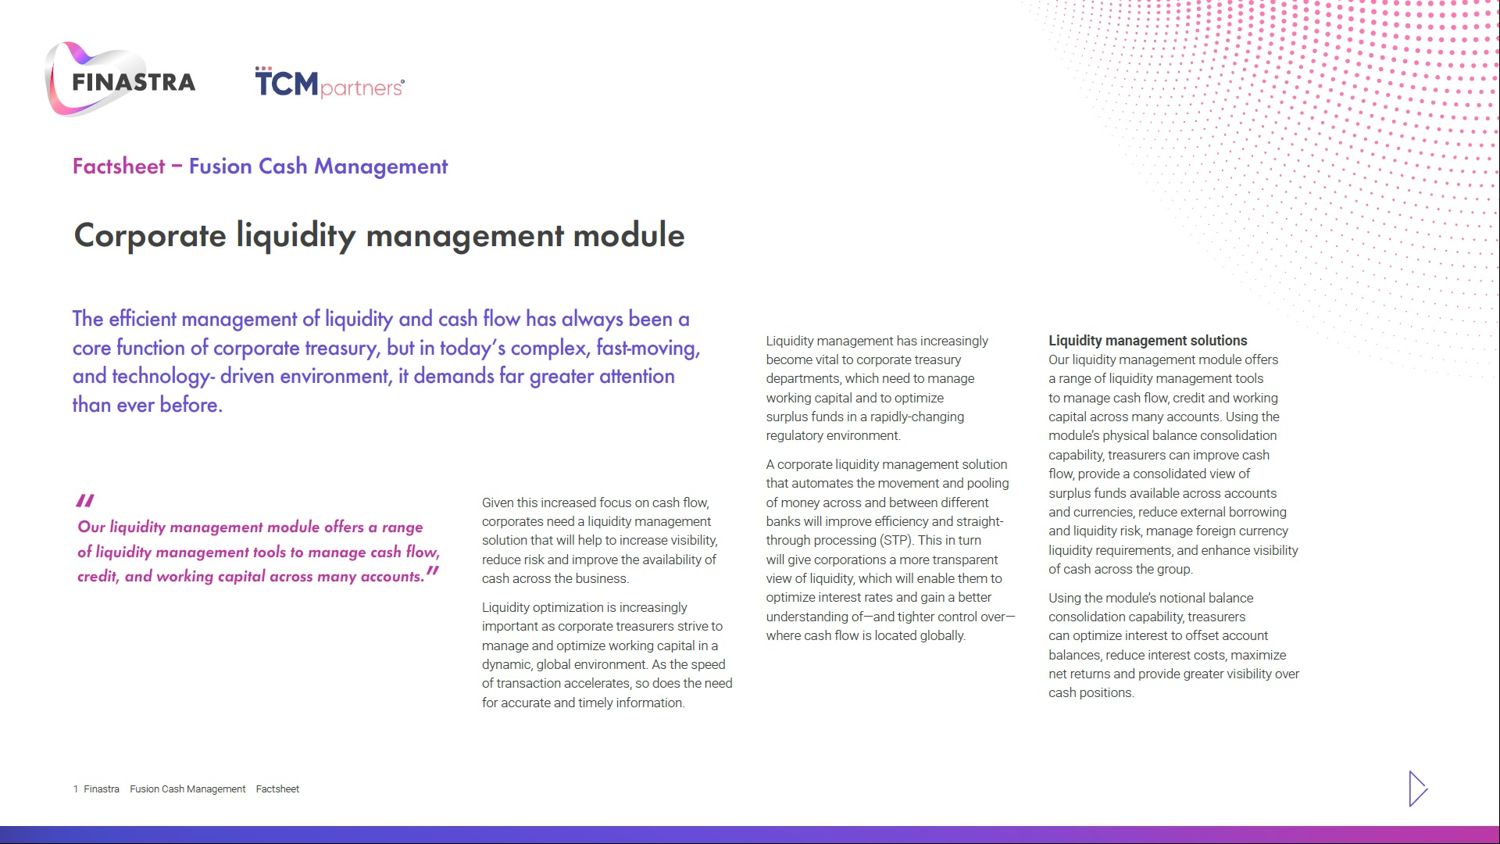 Fact Sheet - Corporate liquidity management module; increased focus on cash flow, liquidity management solution, increase visibility, reduce risk and improve the availability of cash across the business.